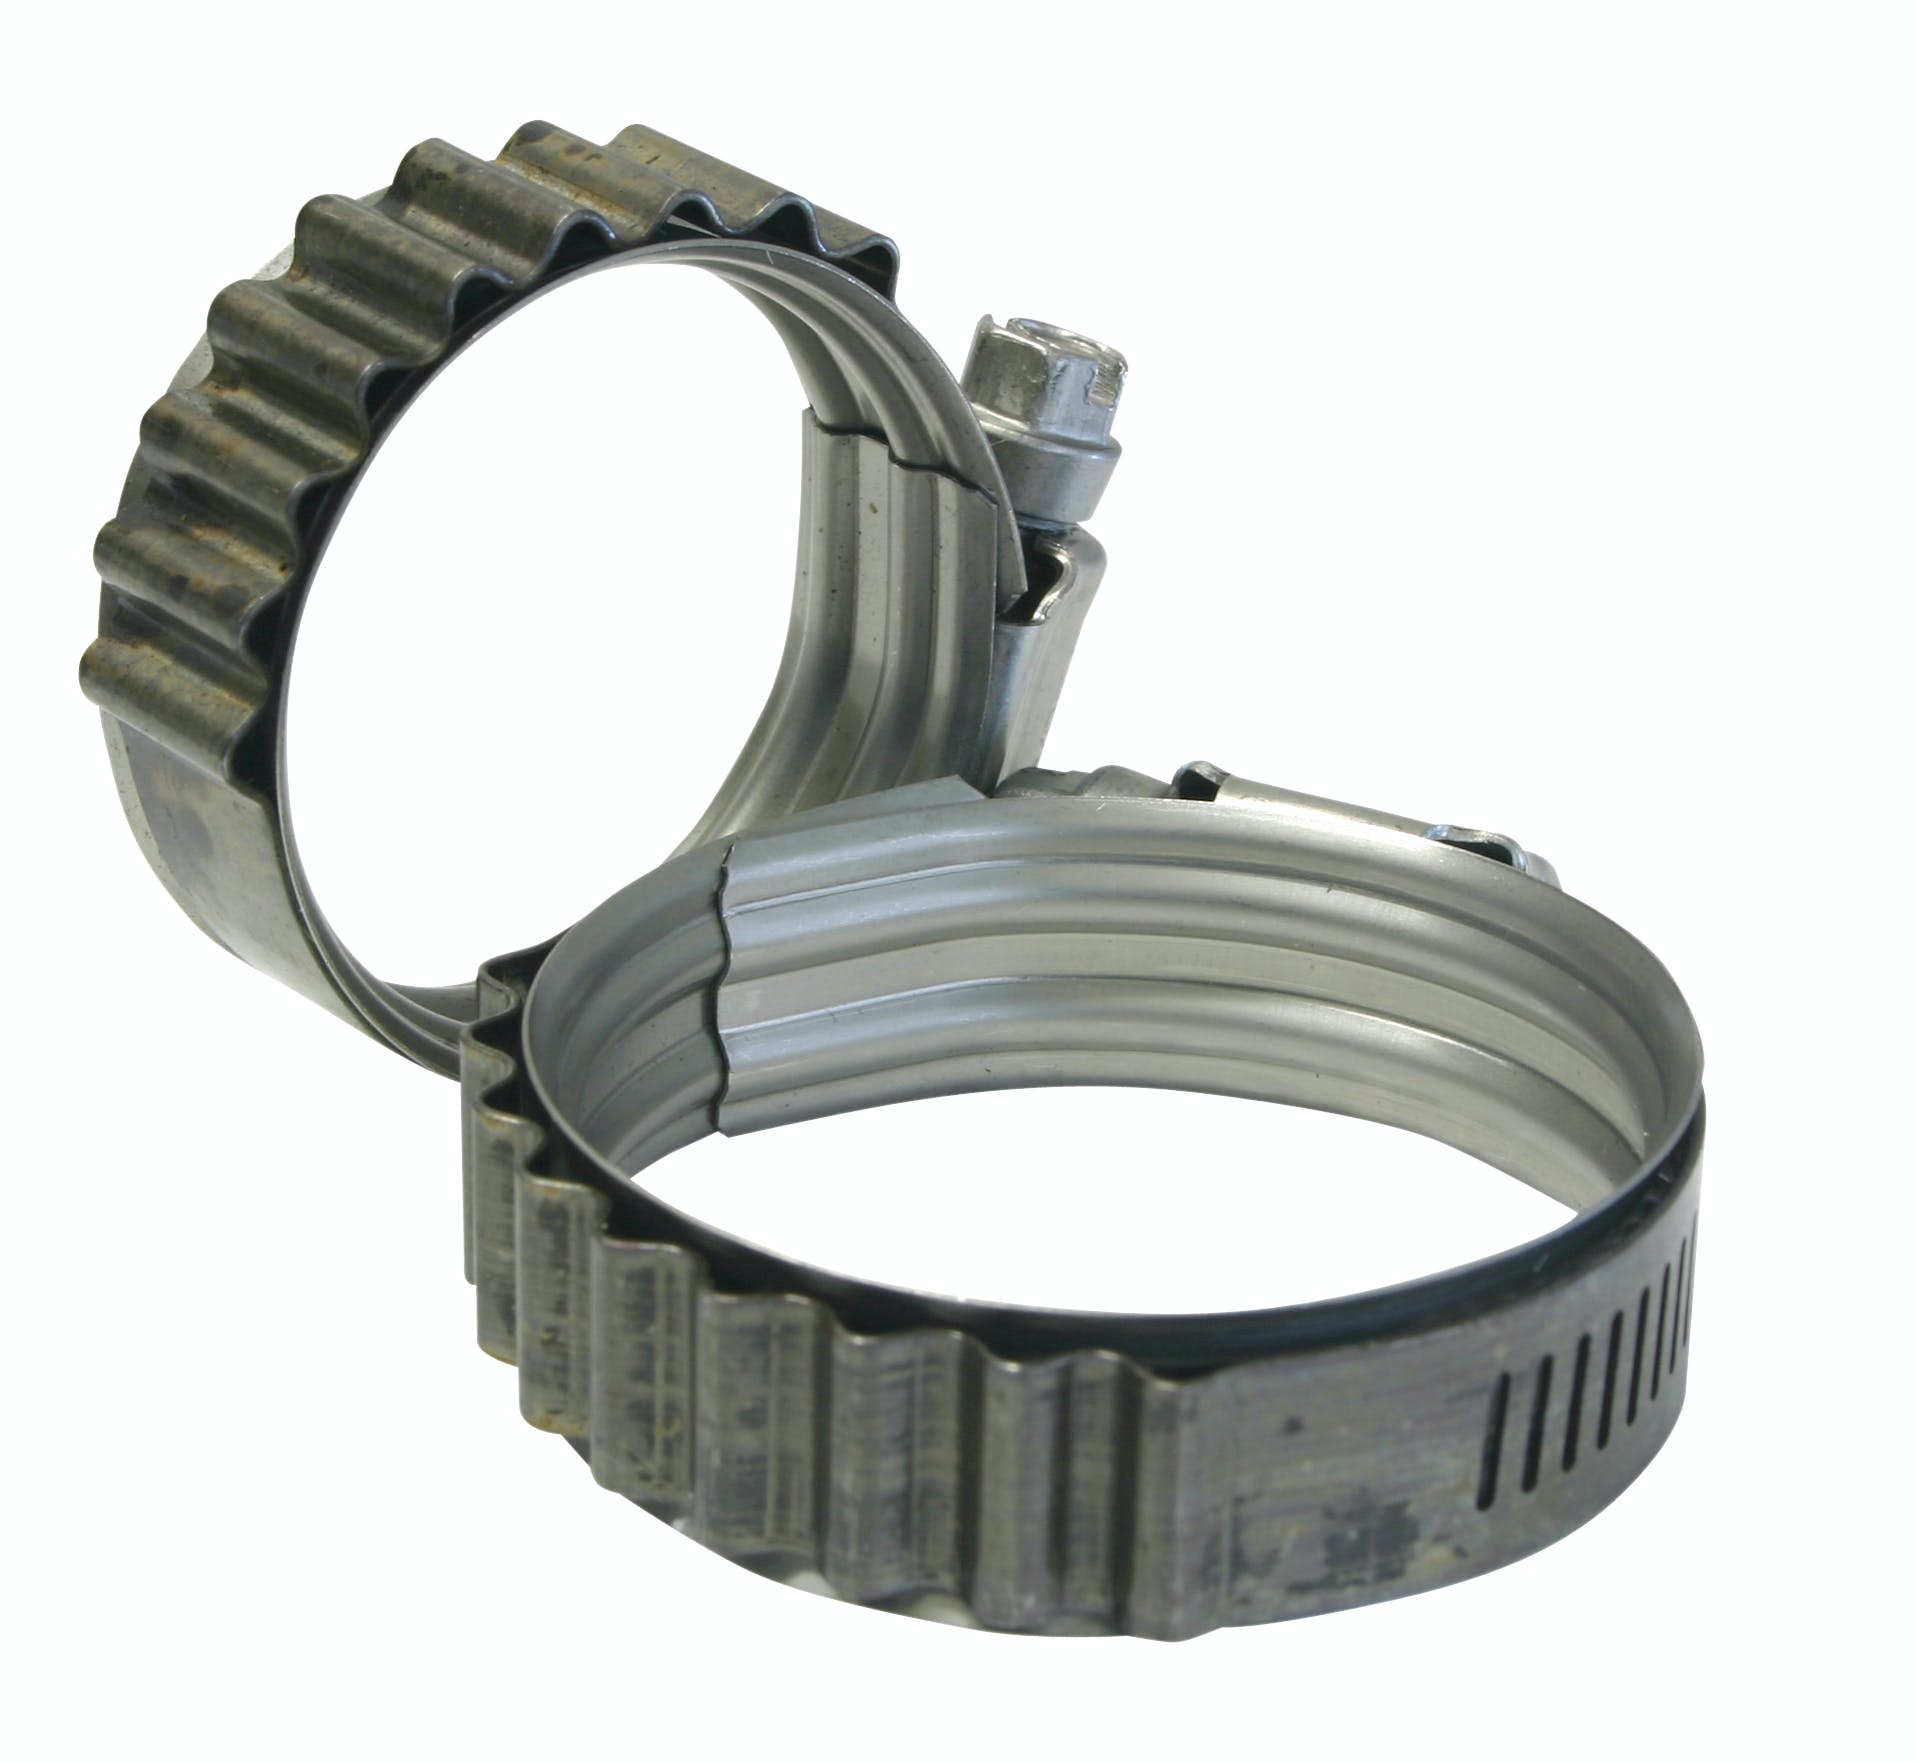 Turbosmart TS-HCT-M033 Turbo-Seal Constant Tension Clamps 1.125-1.500 inch